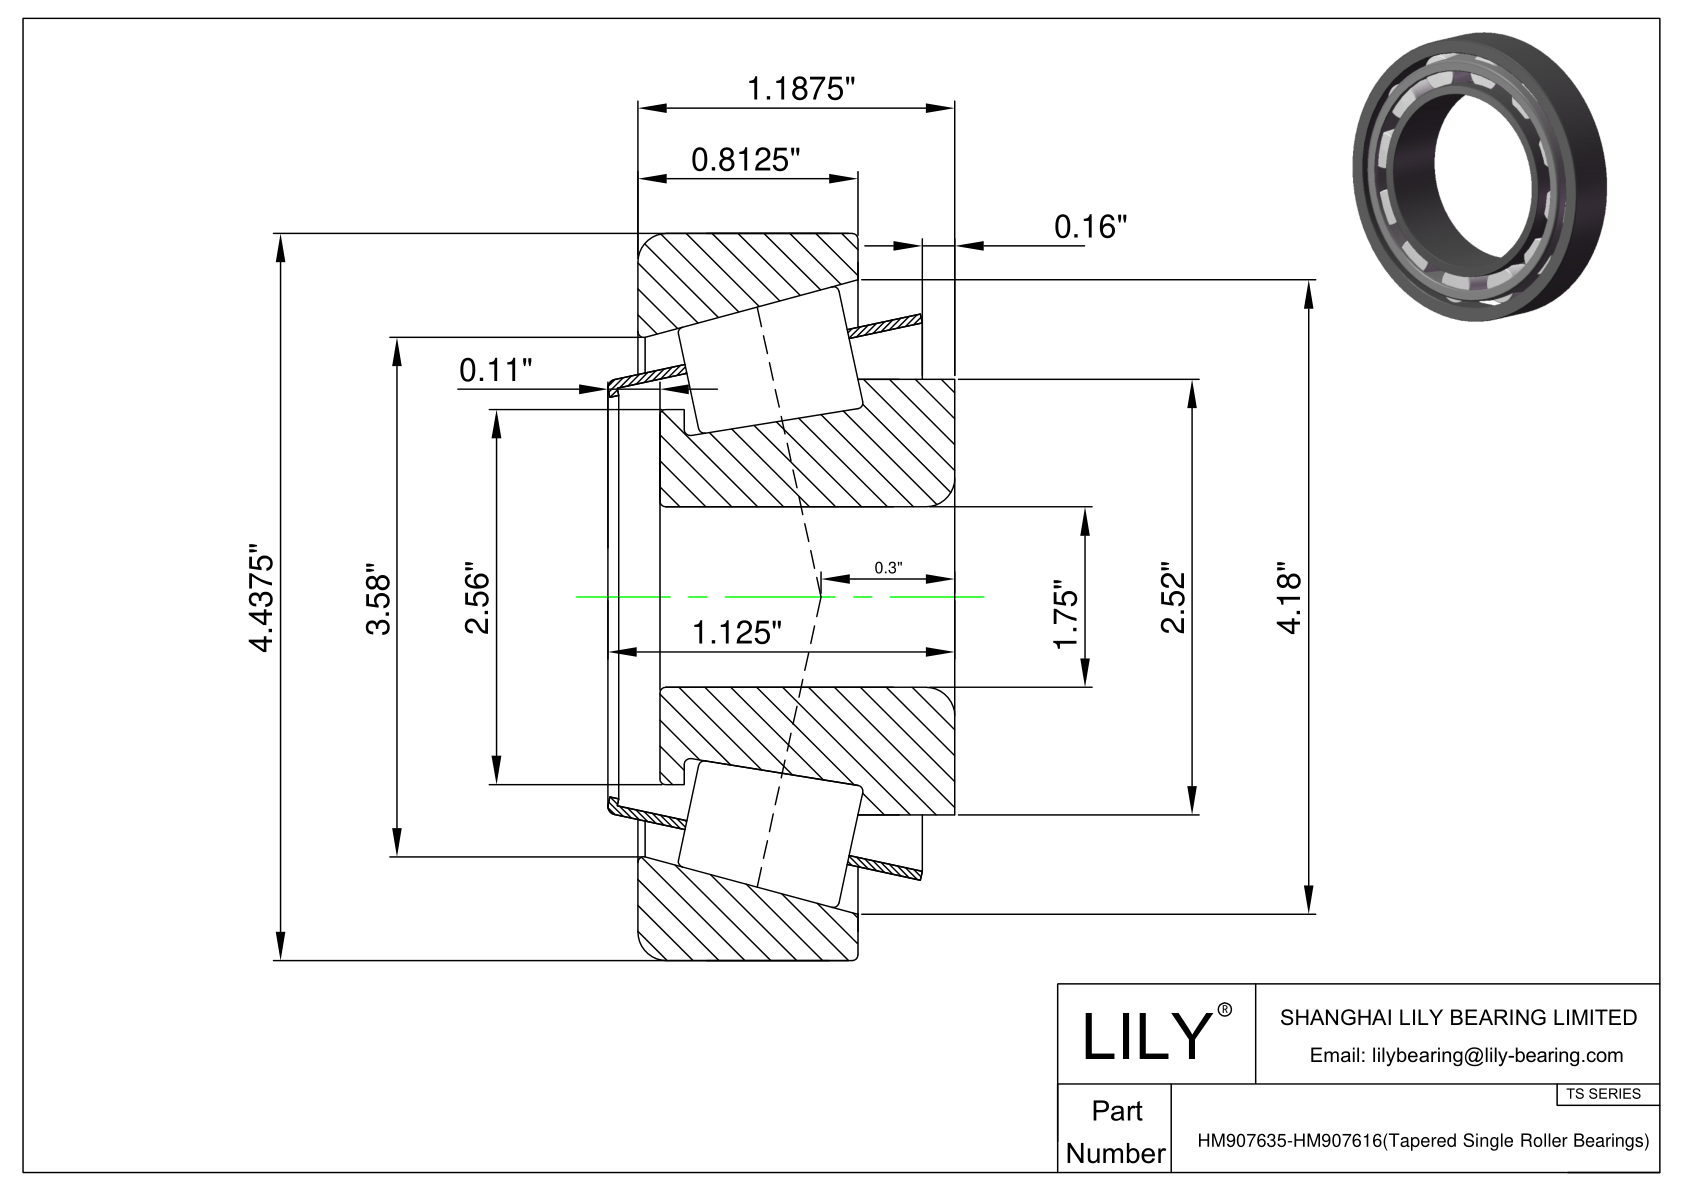 HM907635-HM907616 TS (Tapered Single Roller Bearings) (Imperial) cad drawing